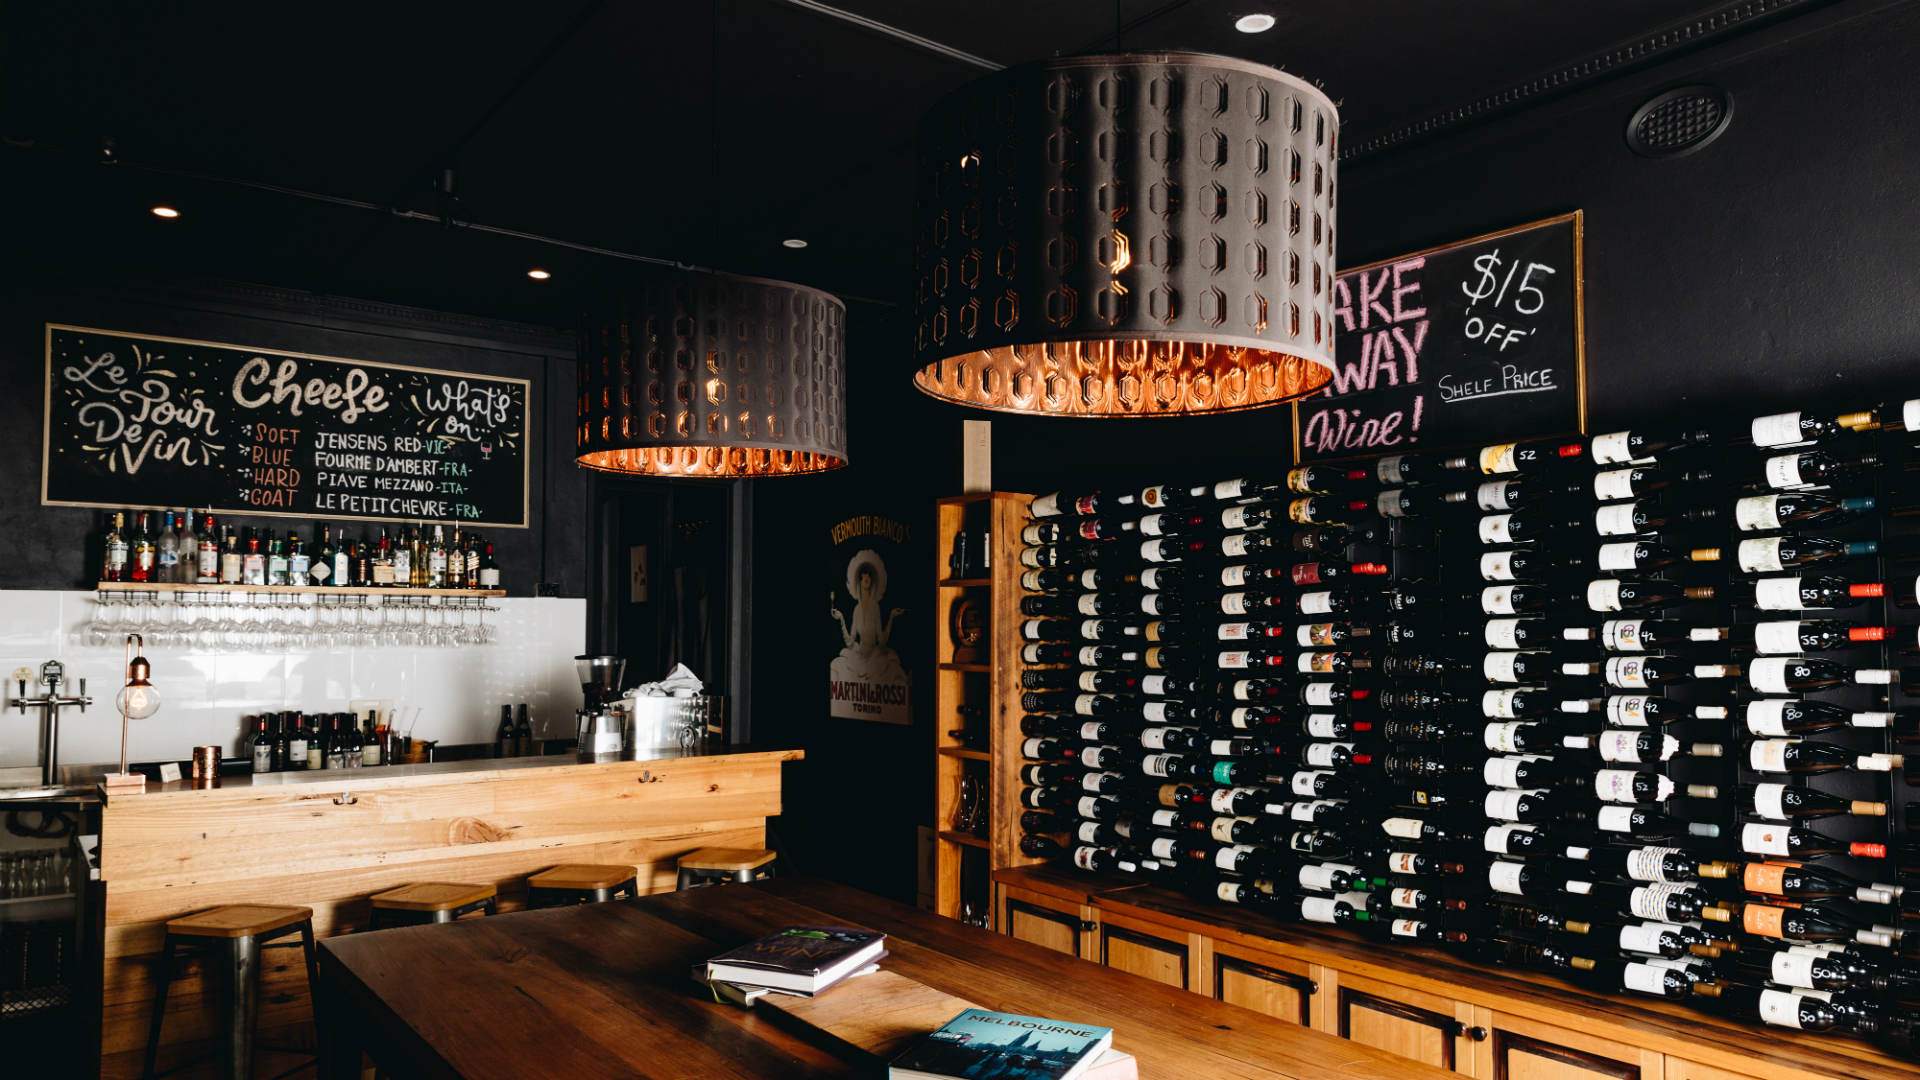 the main bar and dining room at hampton wine co - one of the best wine bars in melbourne